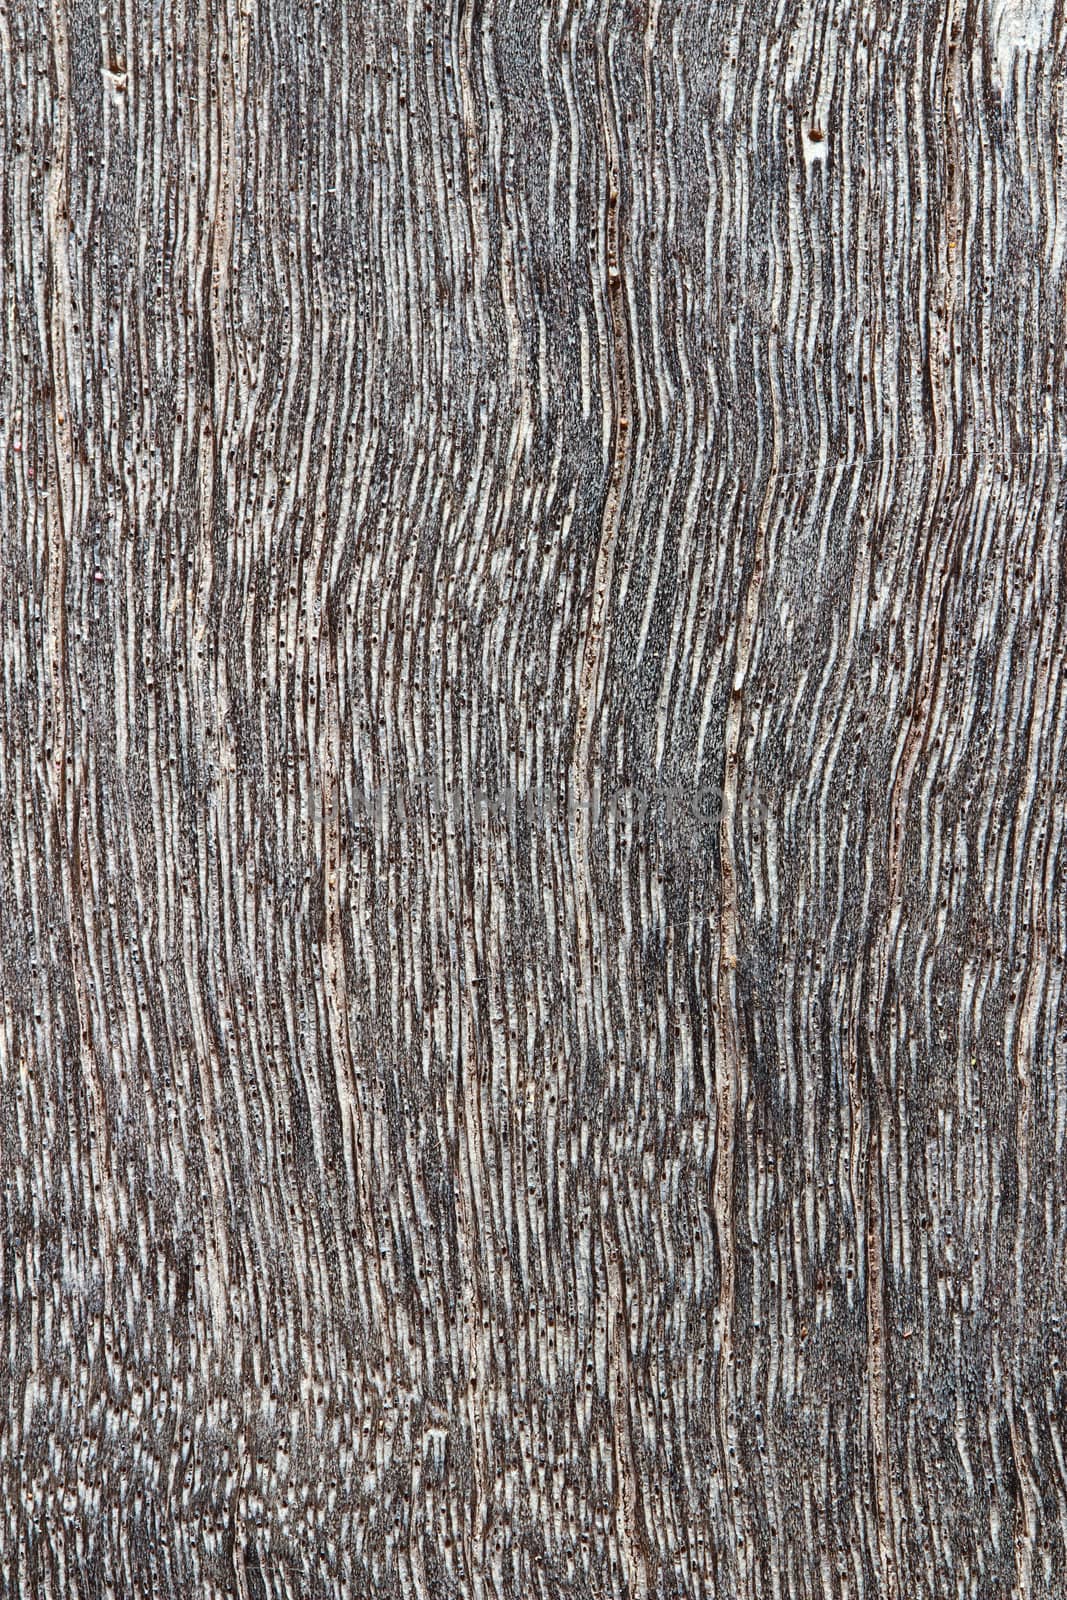 abstract wood texture with focus on the wood's grain. by bajita111122